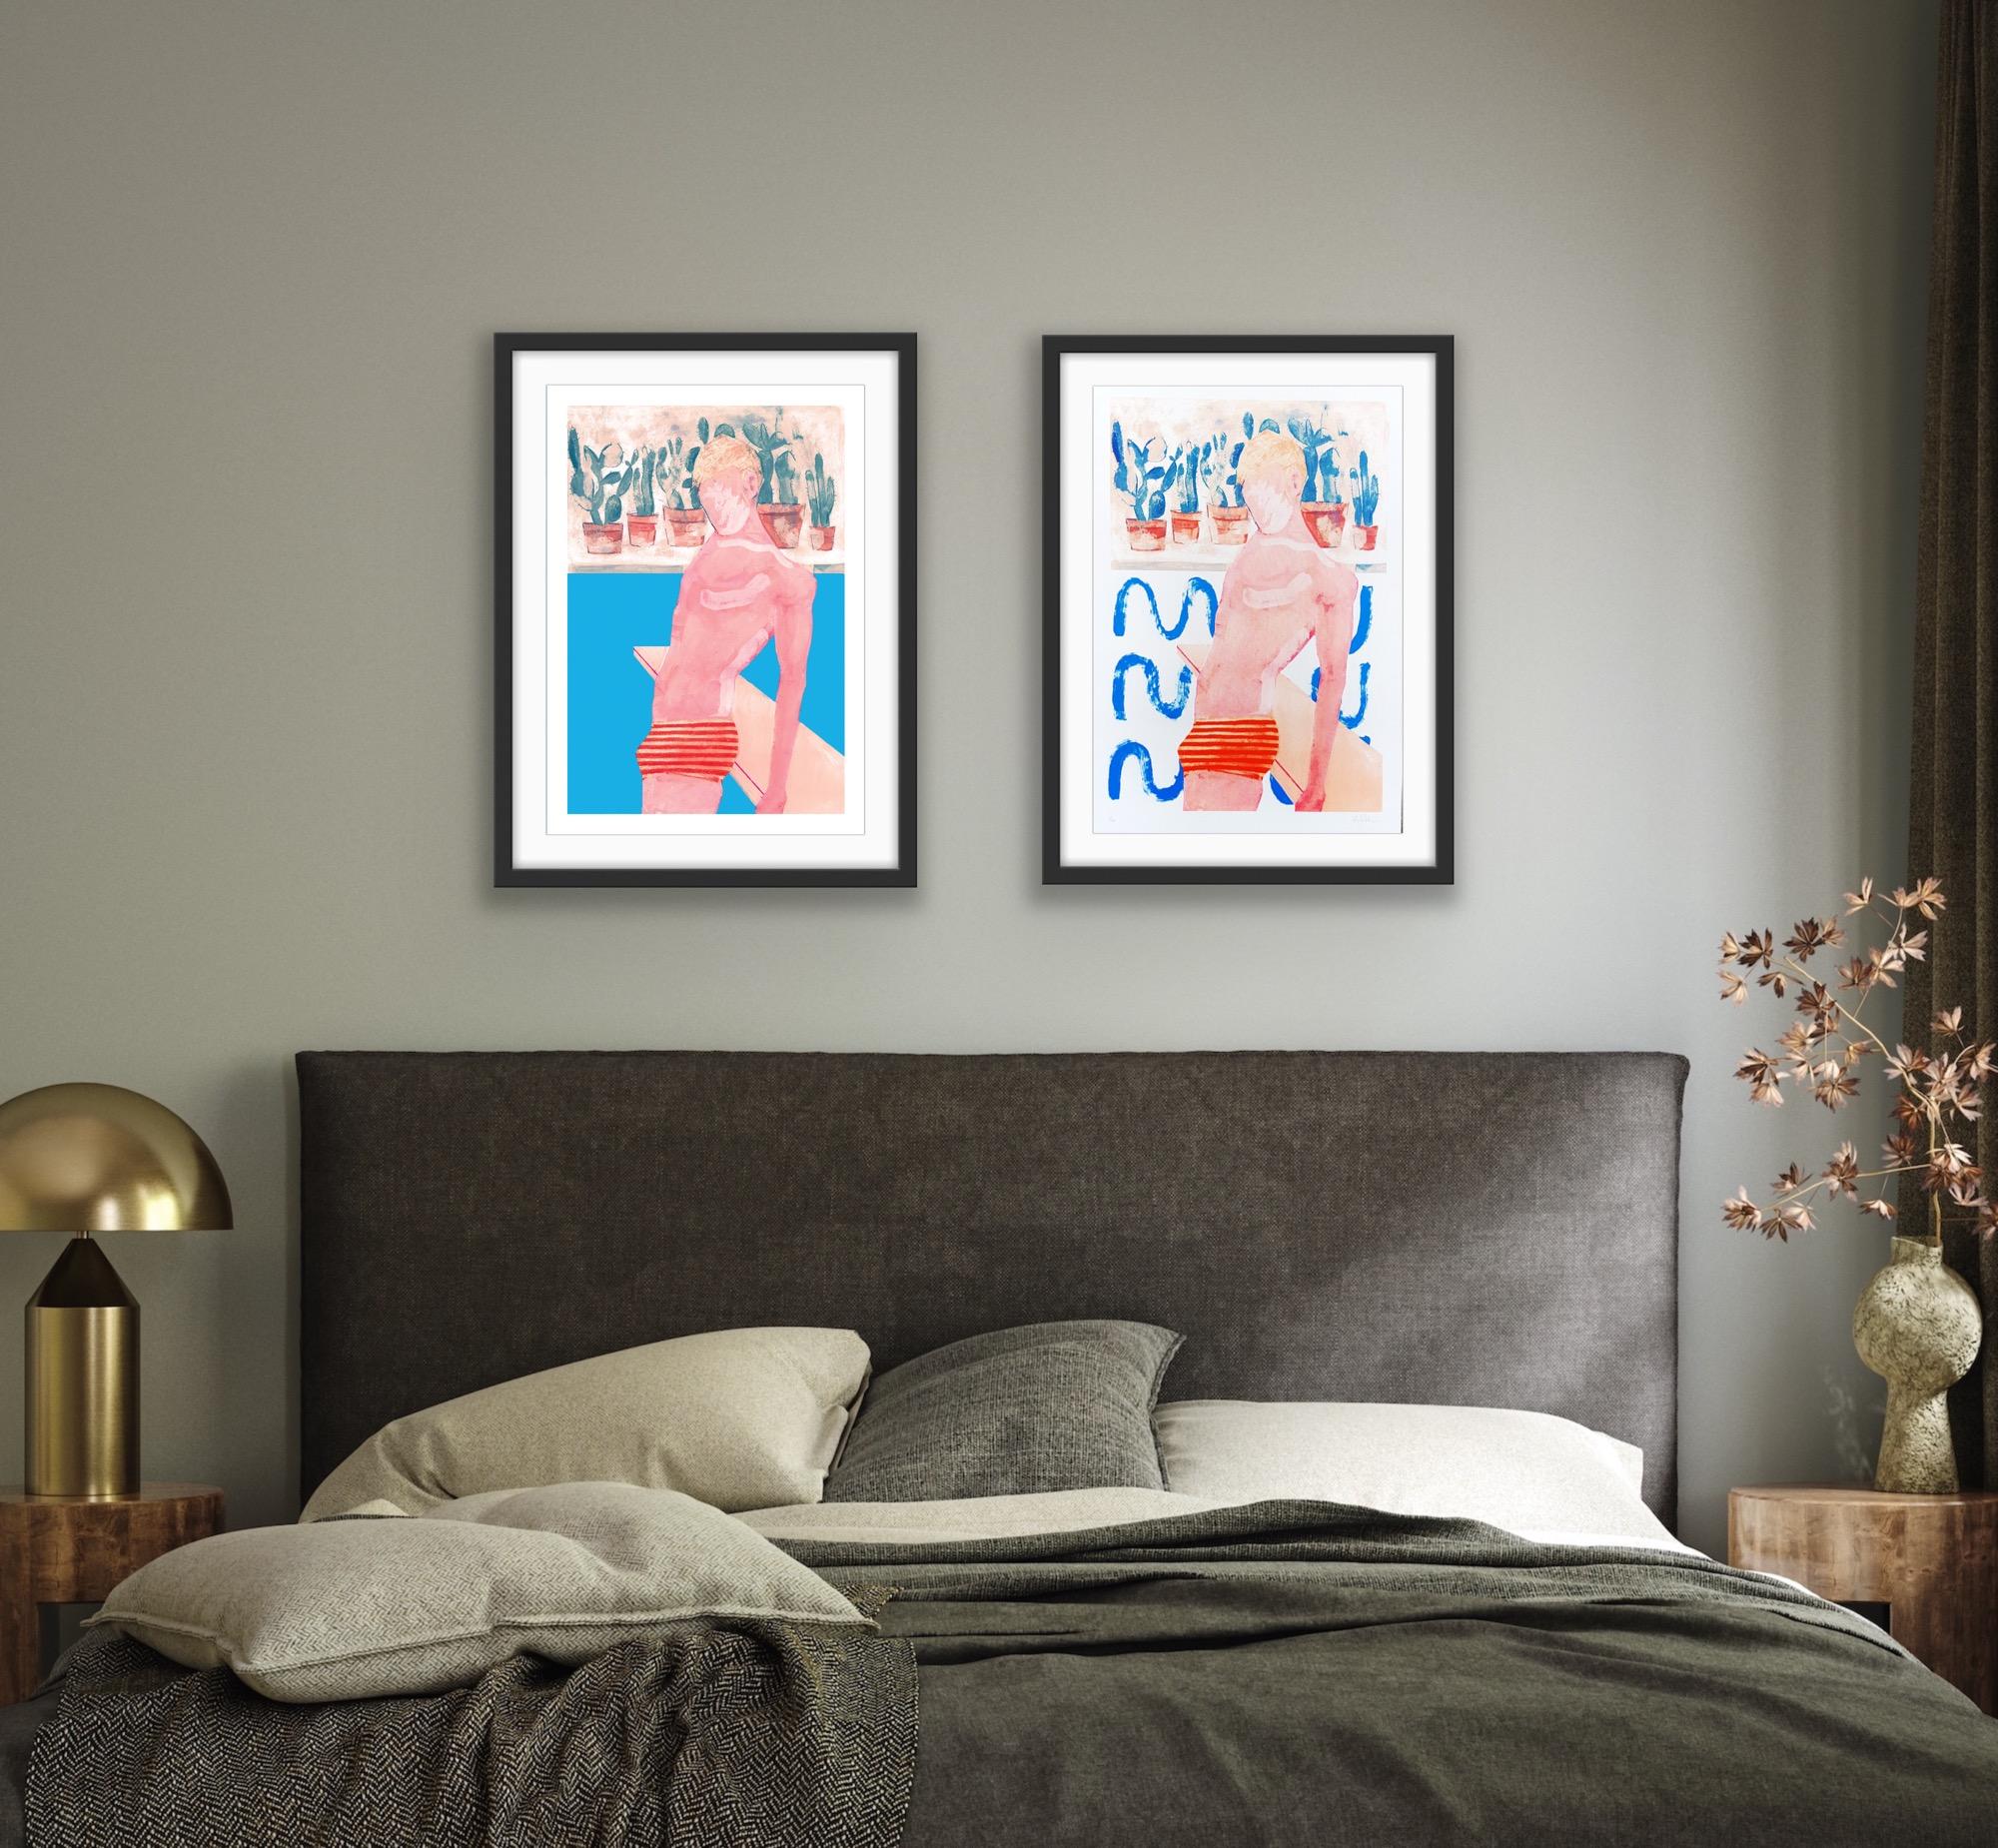 Diptych of Pool Boy and Pool Boy Ripples, Limited Edition Art print, Swimming - Print by Gavin Dobson